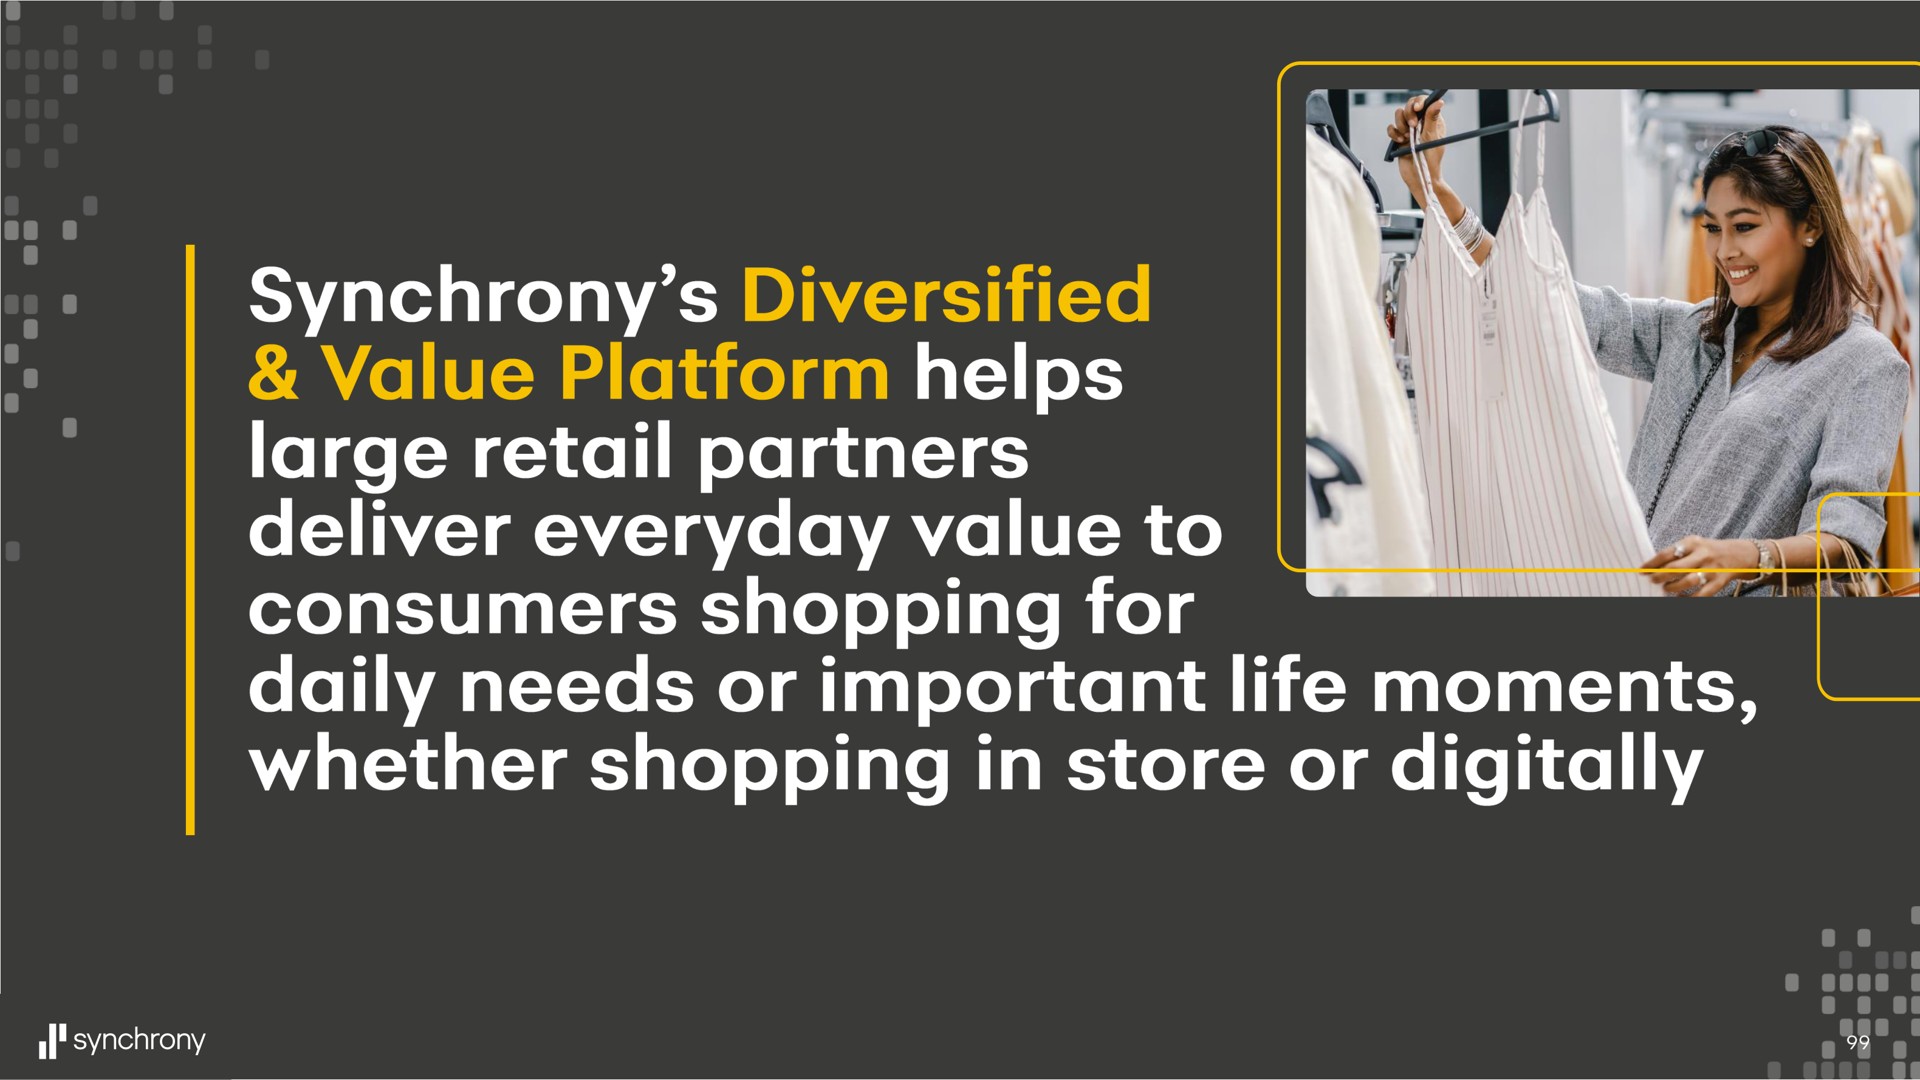 synchrony diversified value platform helps large retail partners deliver everyday value to consumers shopping for daily needs or important life moments whether shopping in store or digitally | Synchrony Financial